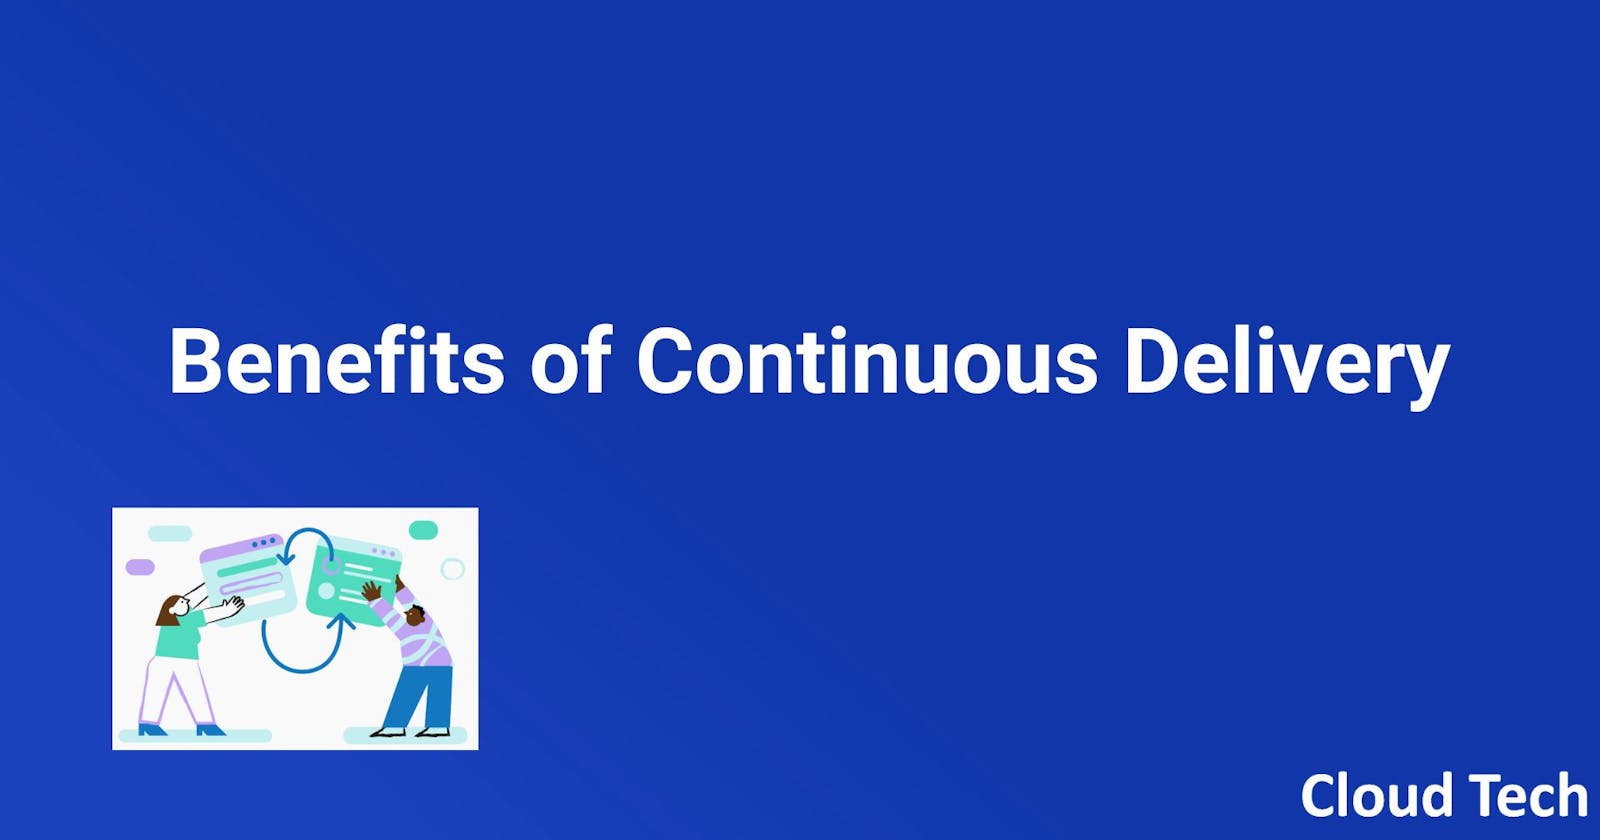 Benefits of continuous delivery